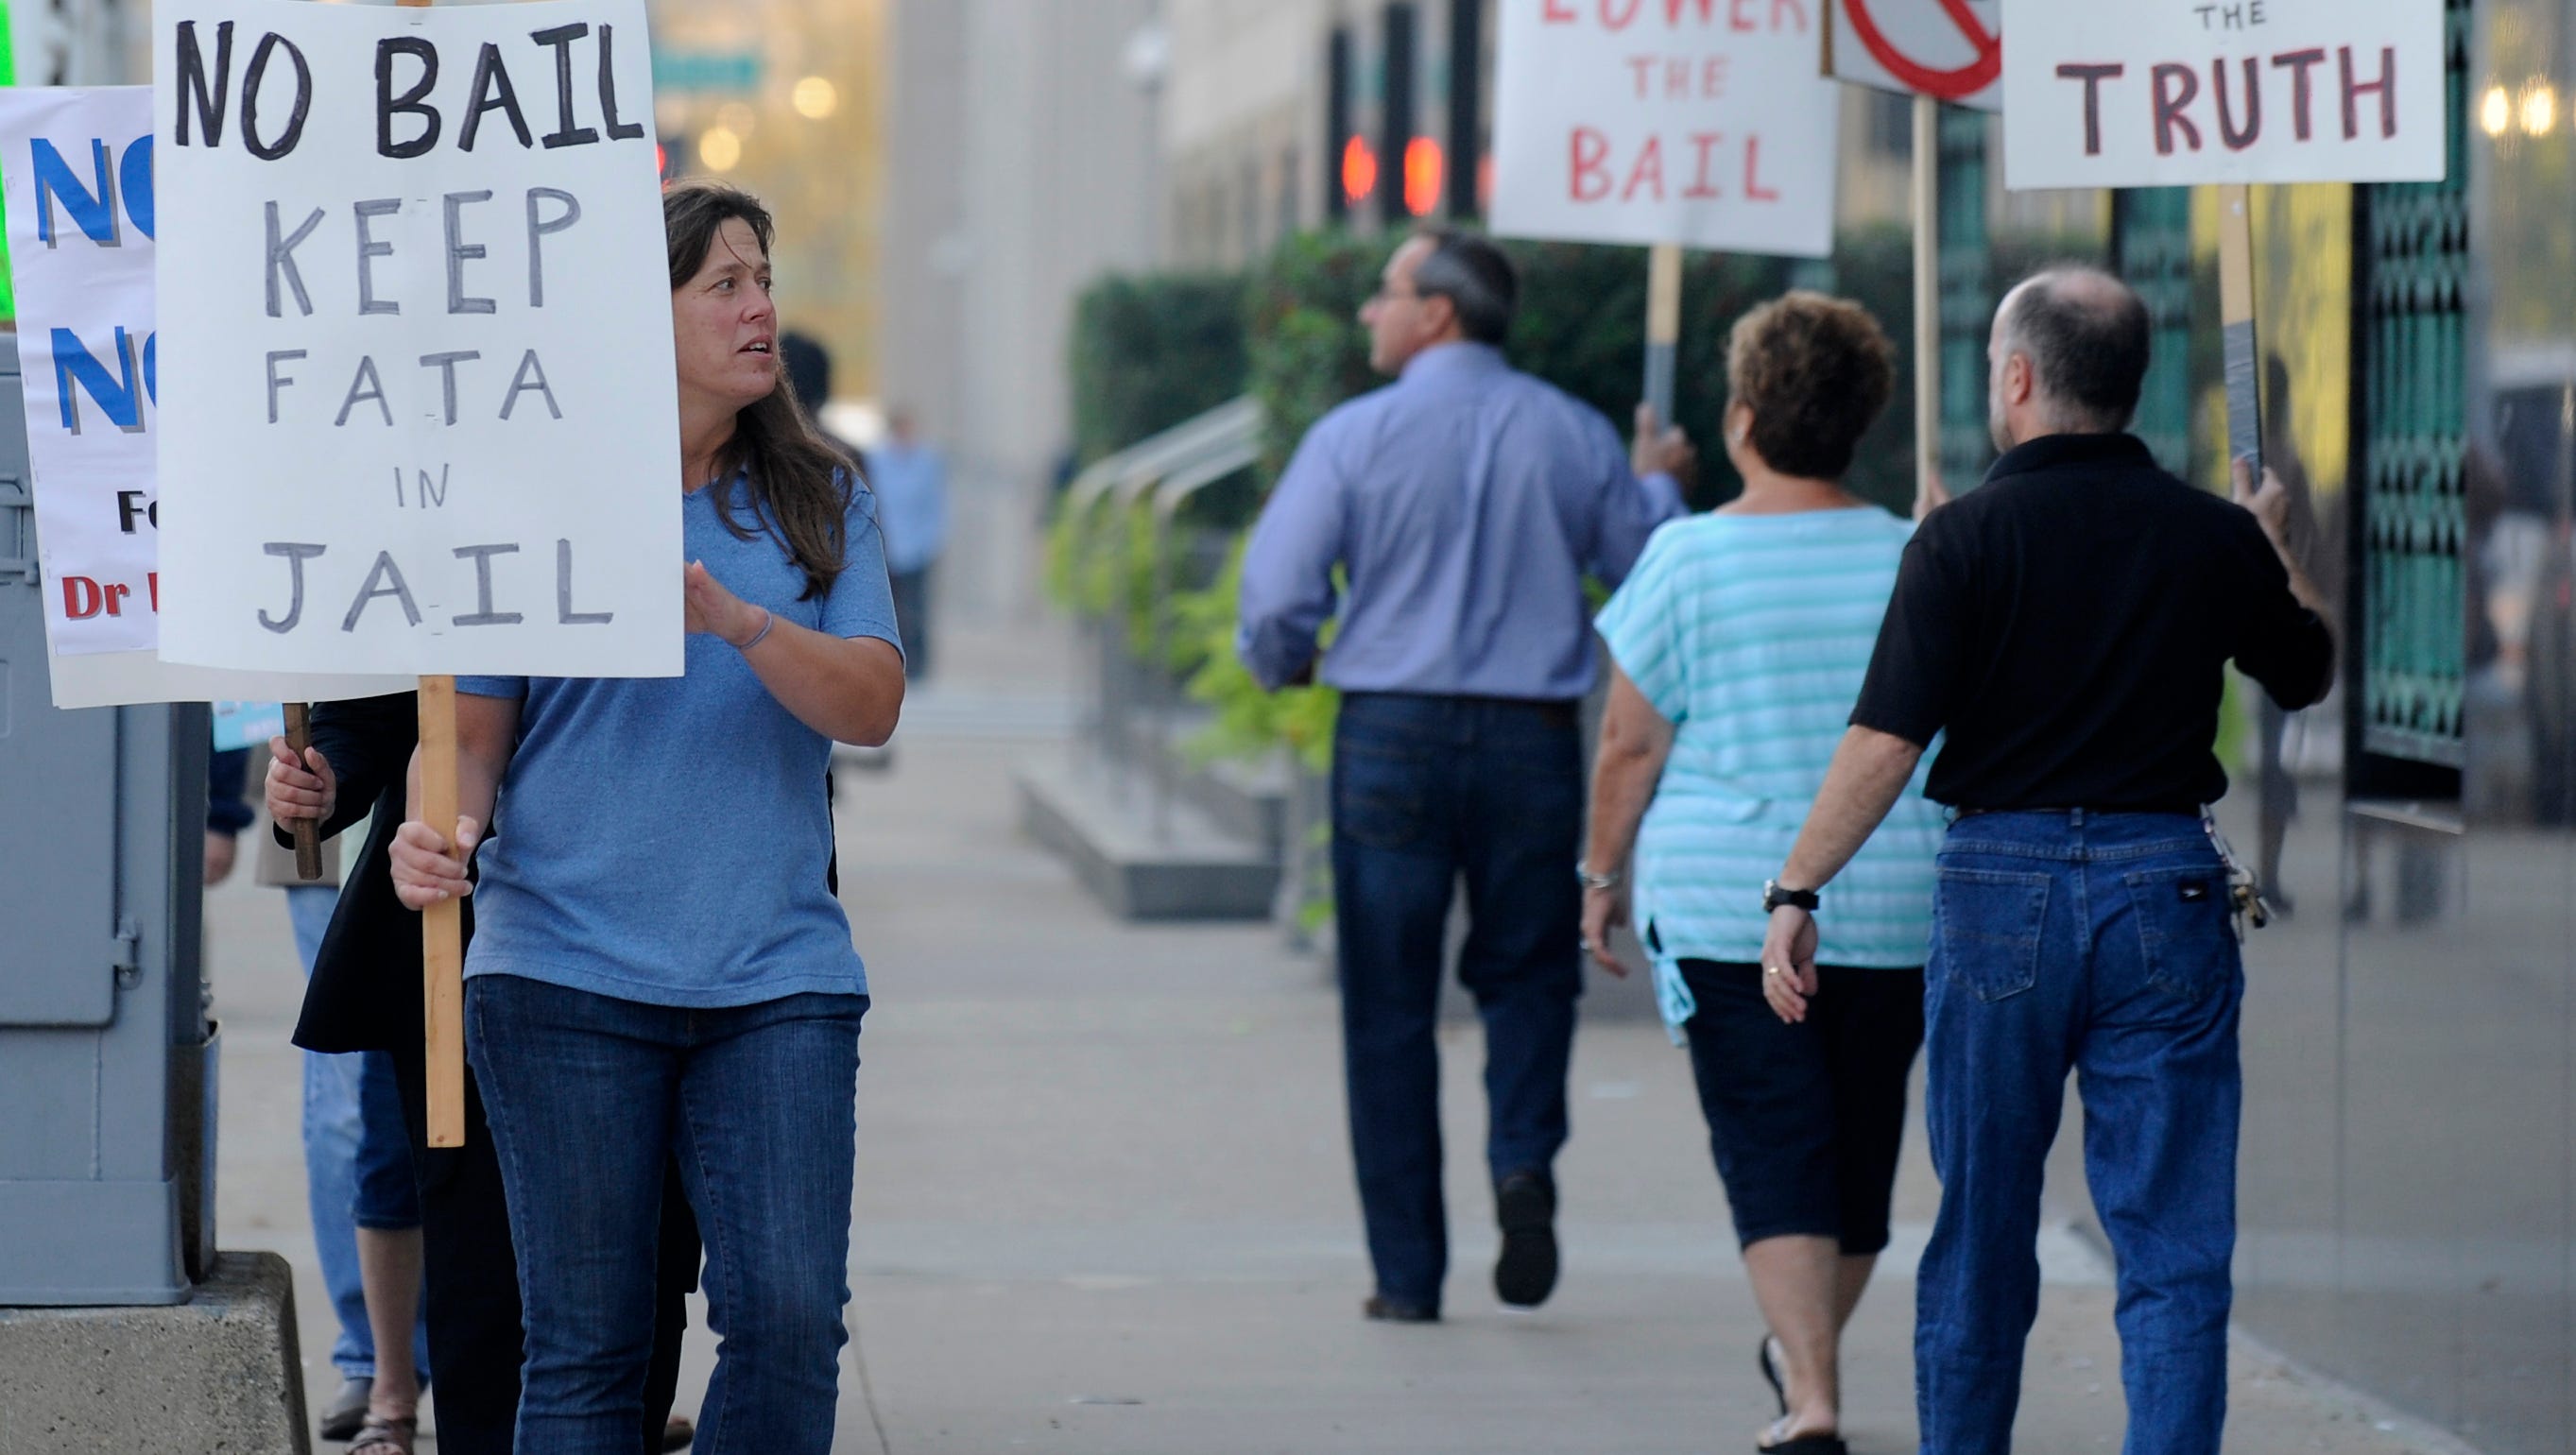 People picket the federal courthouse in Detroit in 2013 at a bail hearing for Dr. Fata.